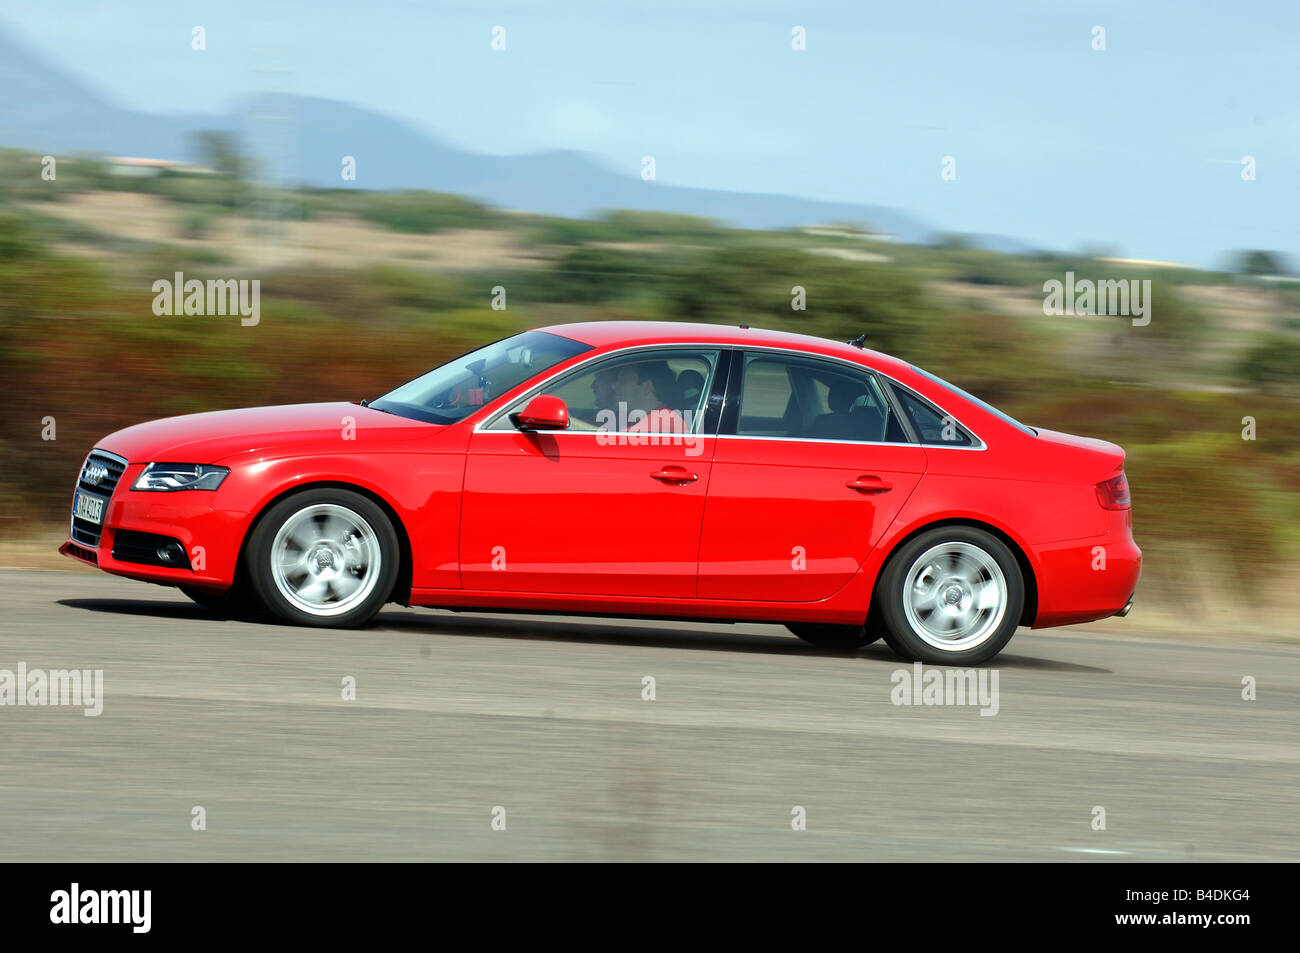 Audi A4 1.8 TFSI Ambition, model year 2007-, red, driving, side view, country road Stock Photo